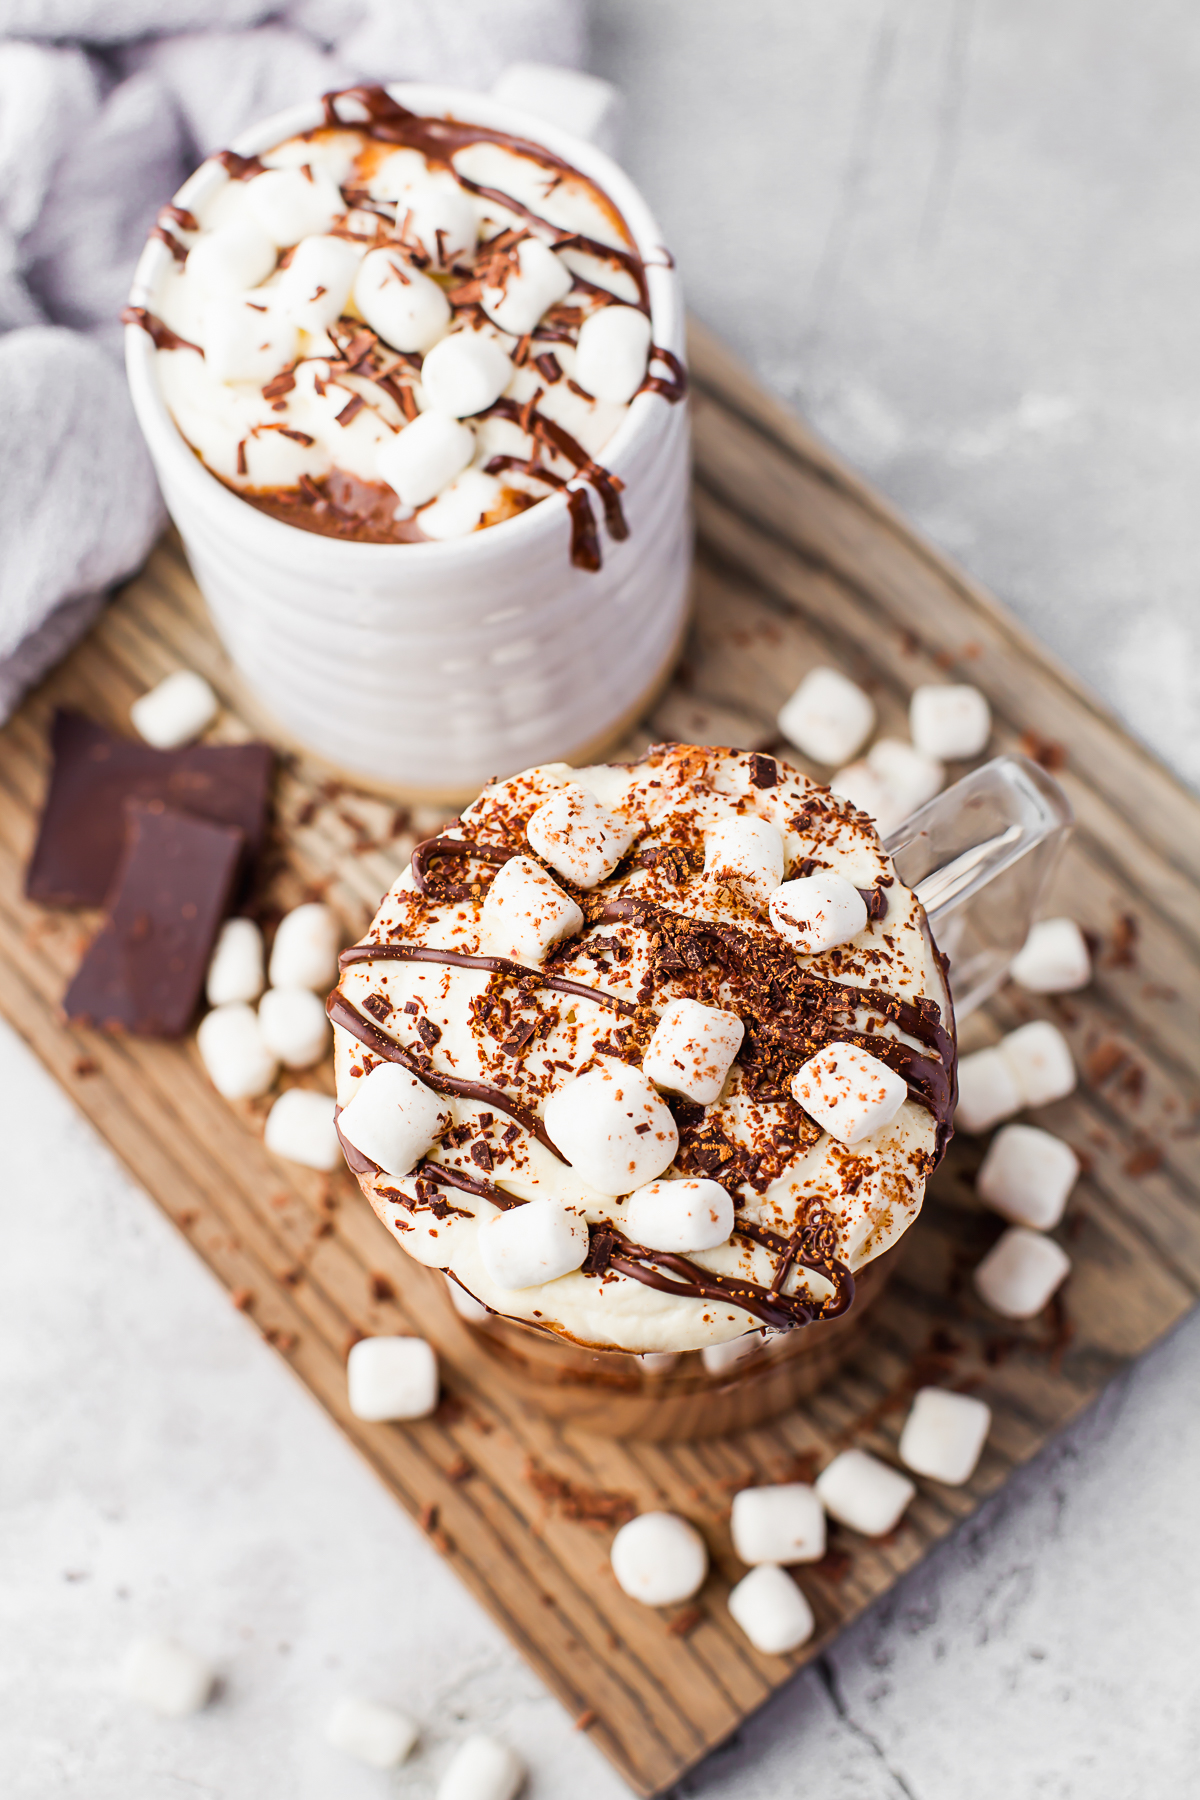 2 mugs of Slow Cooker Hot Chocolate. 